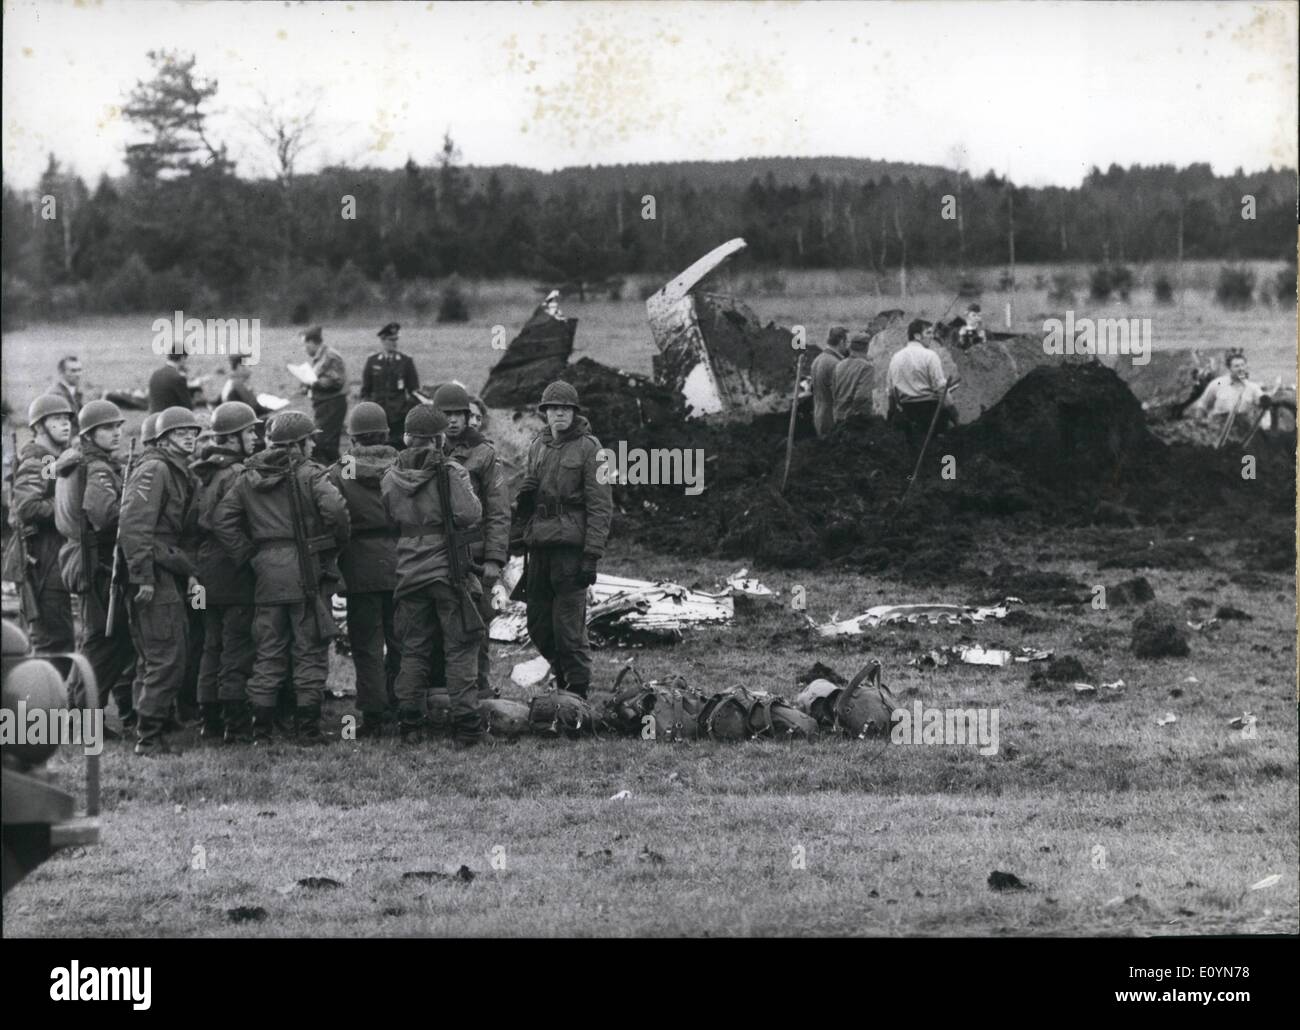 Nov. 11, 1970 - Five were killed in Noratlas-crash in Bavaria: Five soldiers of the Federal Defence Forces have been killed in a crash of an aircraft of the Federal Defence Forces, type ''Noratlas''. The aircraft which had started in Neubiberg near Munich (Germany) to Kaufbeuren, crashed idnto a swamp two kilometers southwest of Konigsdorf near Wolfratshausen. The cause of this crash, which happened on November 19th, 1970, is not known yet. The place of the crash. Stock Photo